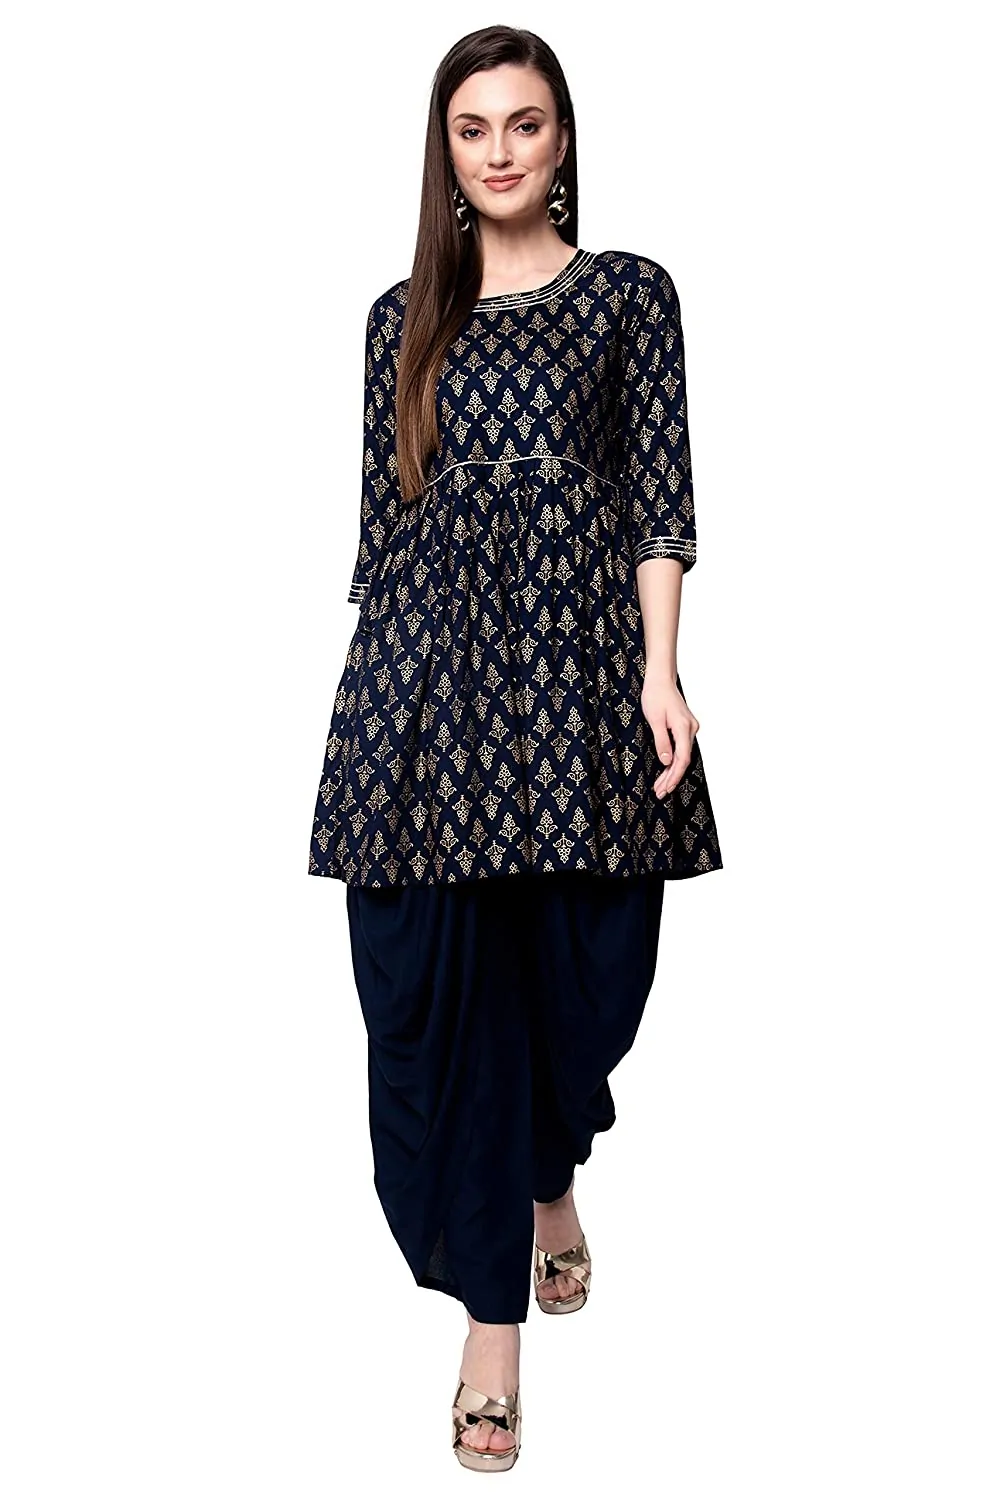 Buy Women Cloths Online, Affordable Kurti & Dress Material for